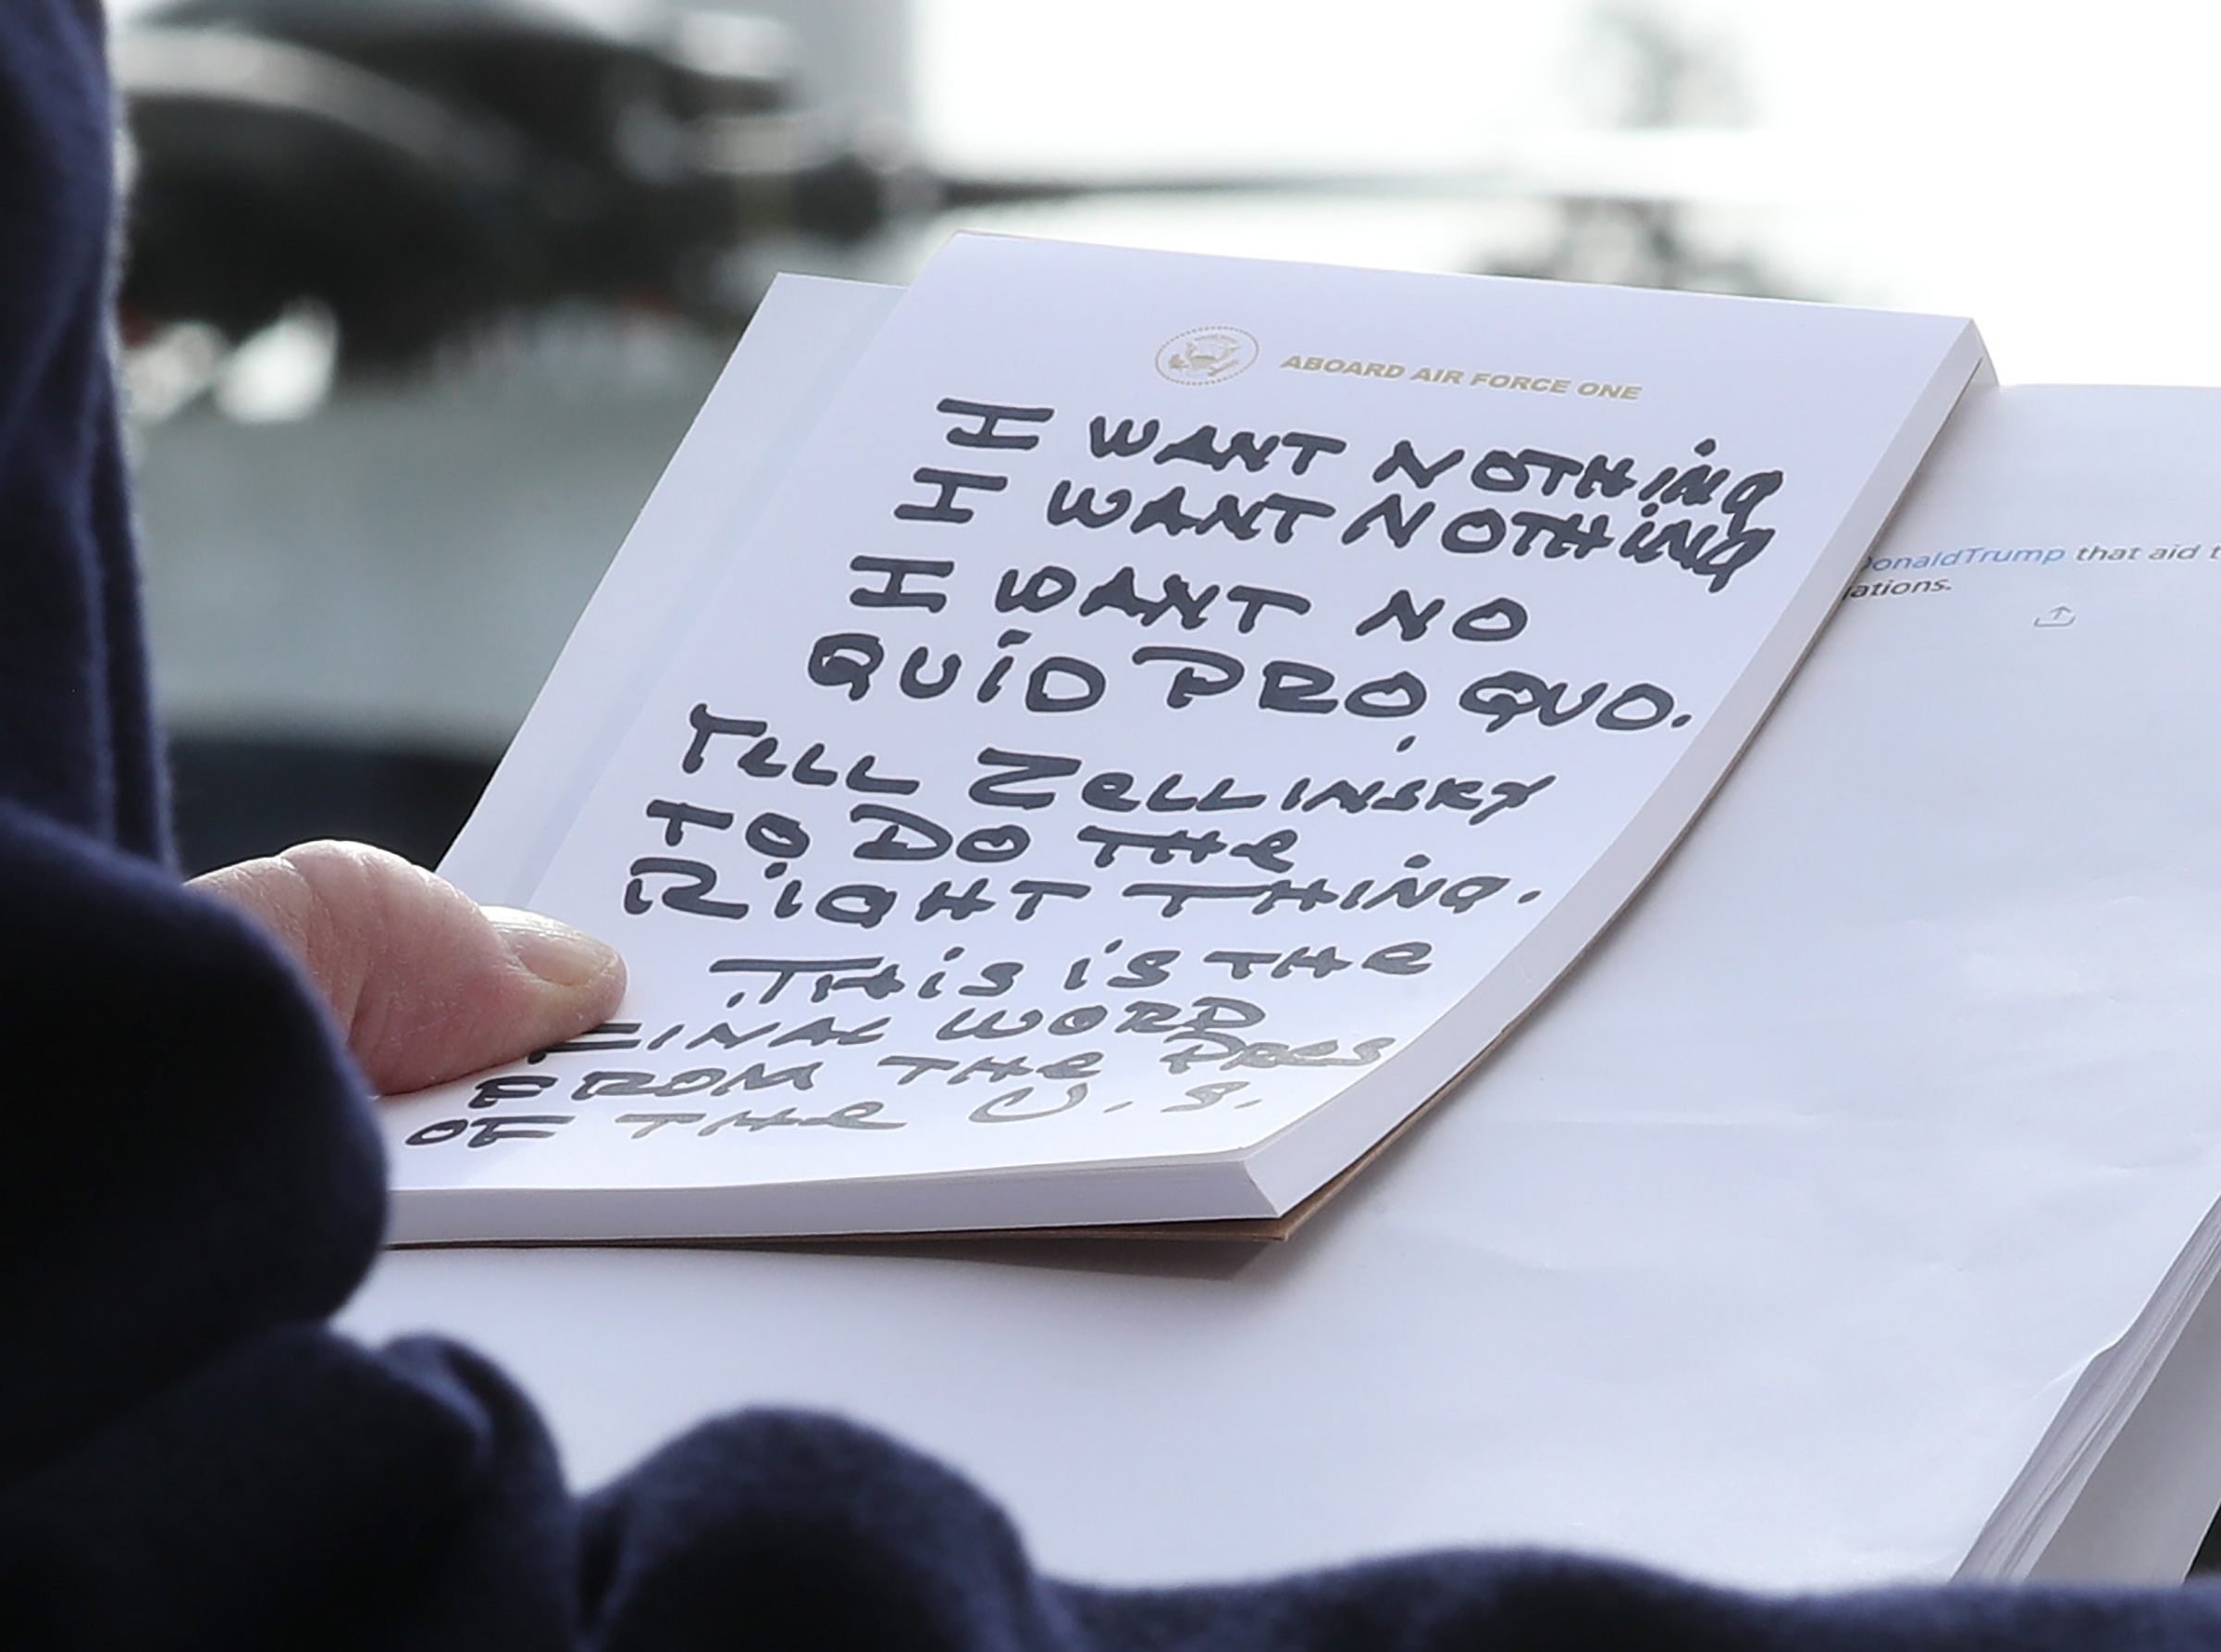 U.S. President Donald Trump holds his notes while speaking to the media before departing from the White House in Washington D.C. on Nov. 20, 2019. (Mark Wilson—Getty Images)